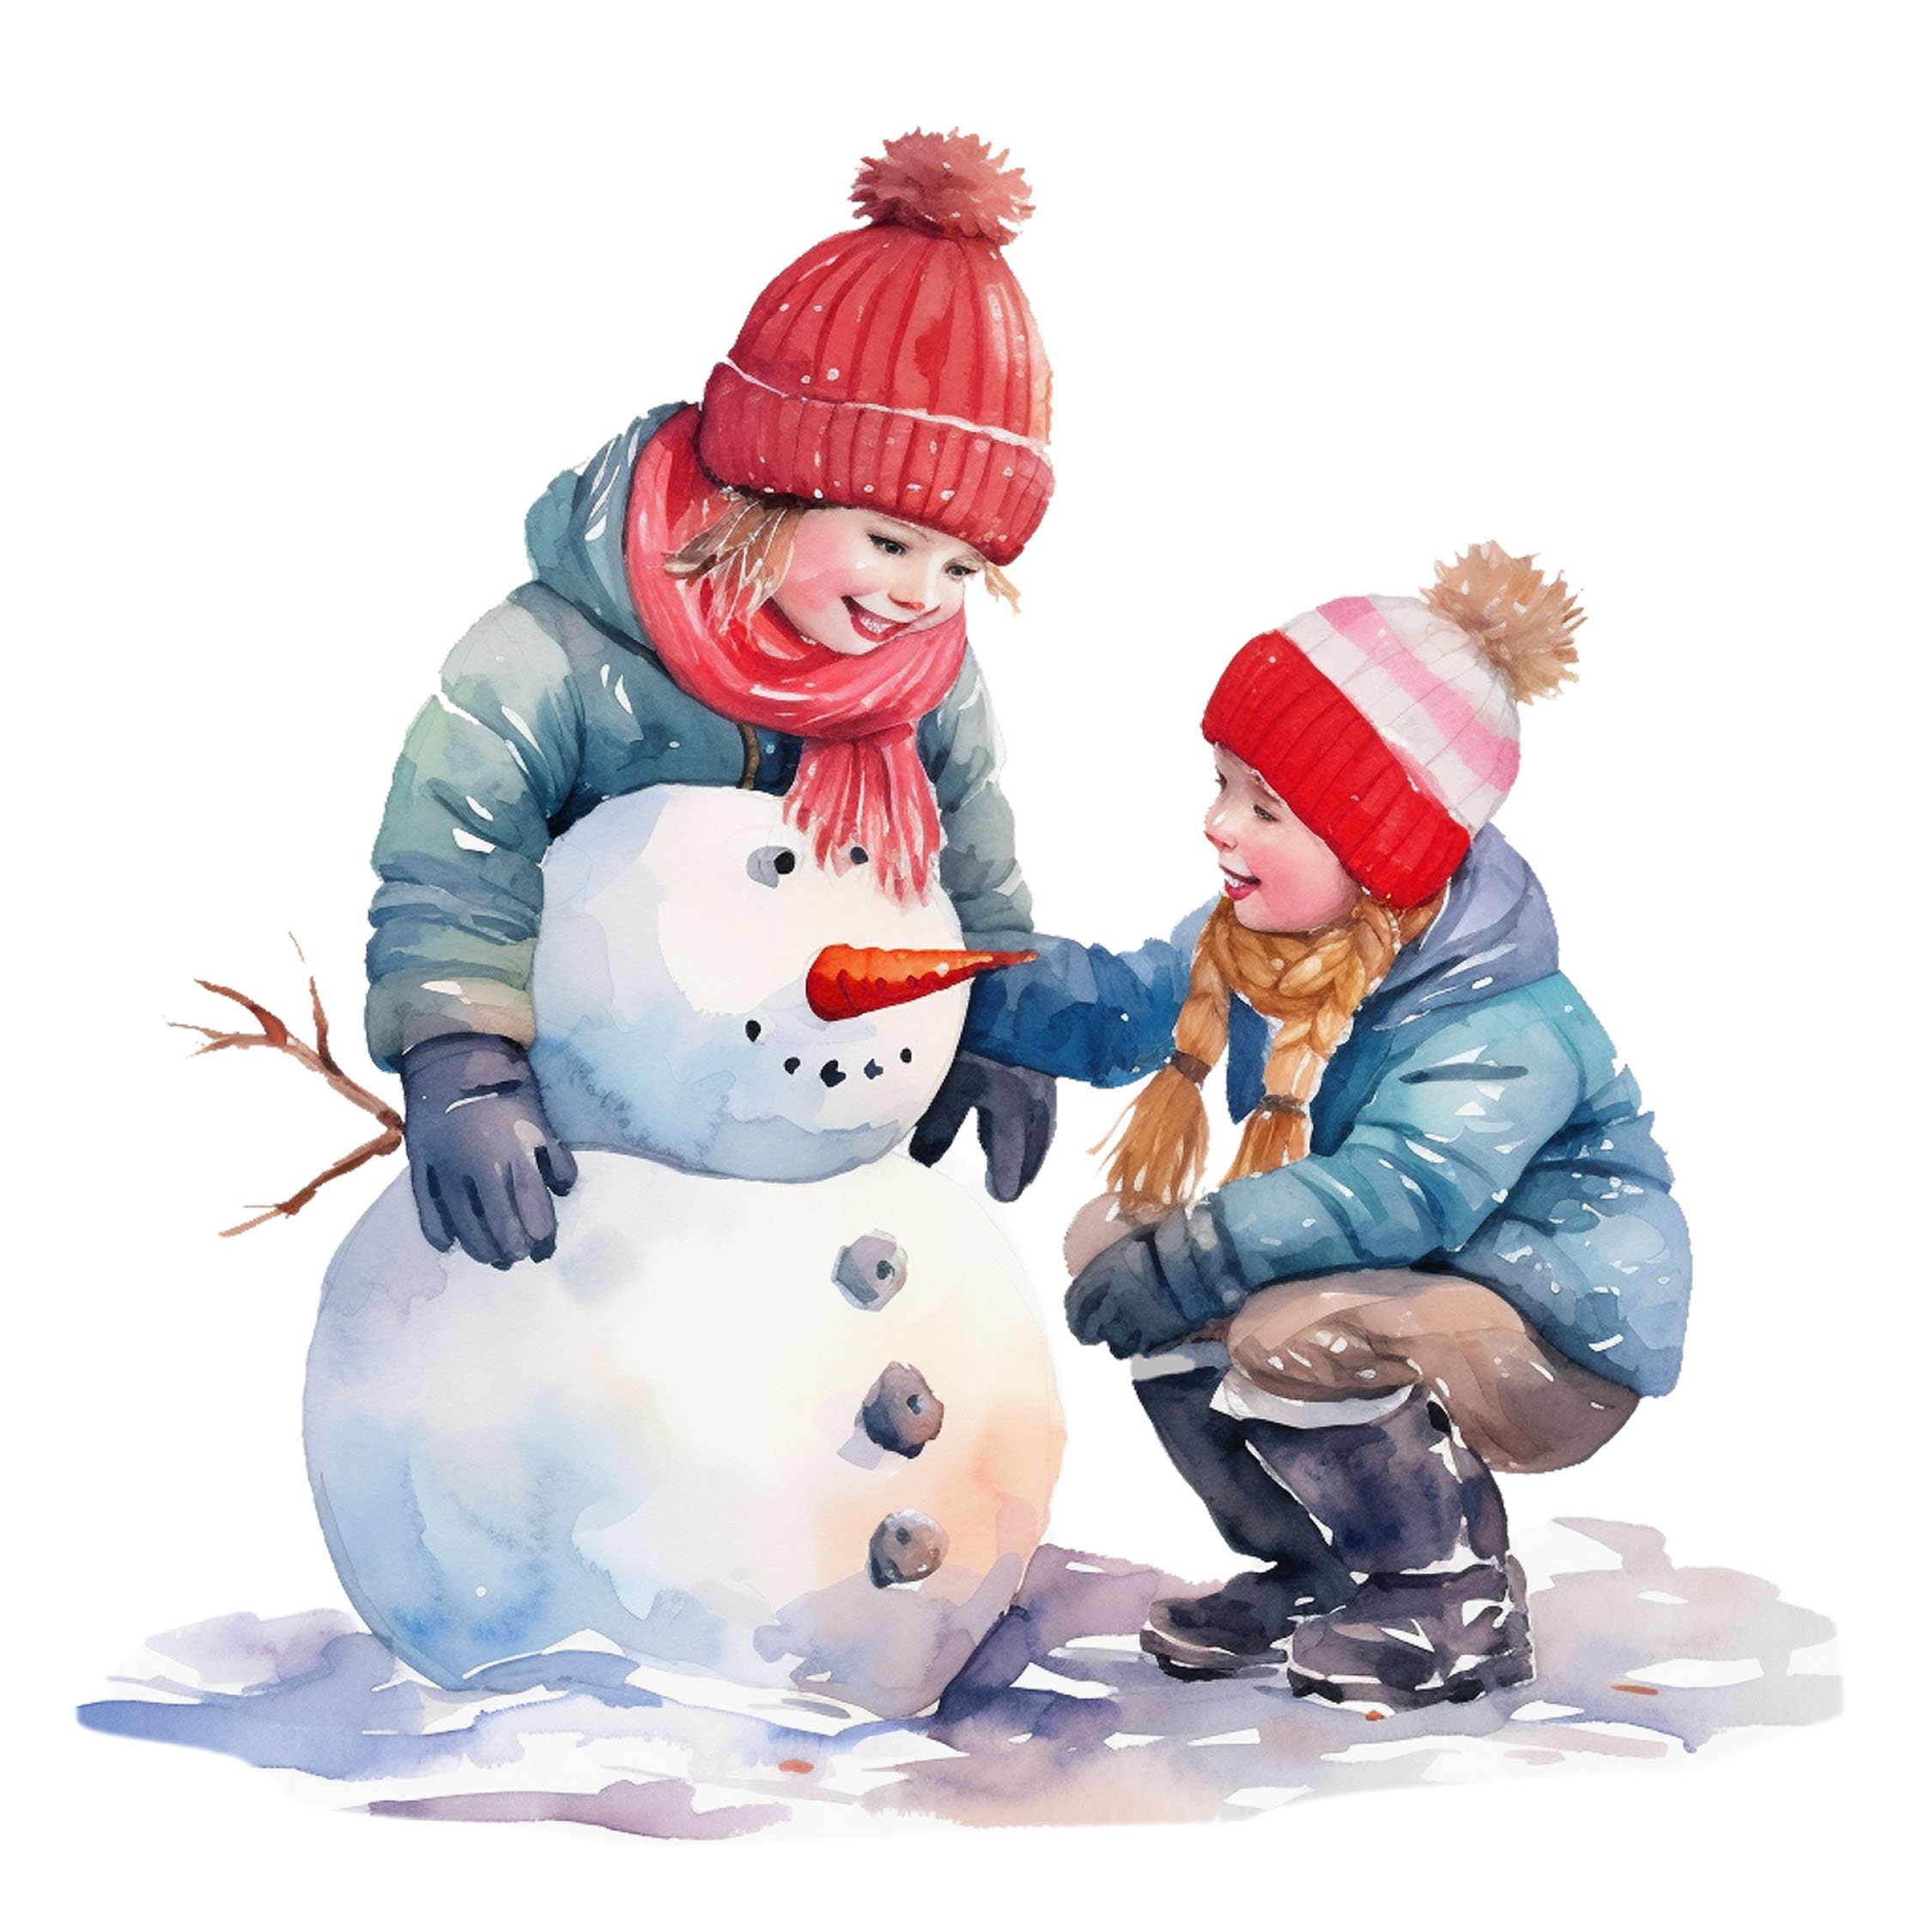 Cute Happy Little Boy and Girl Making Snowman on Christmas Holiday